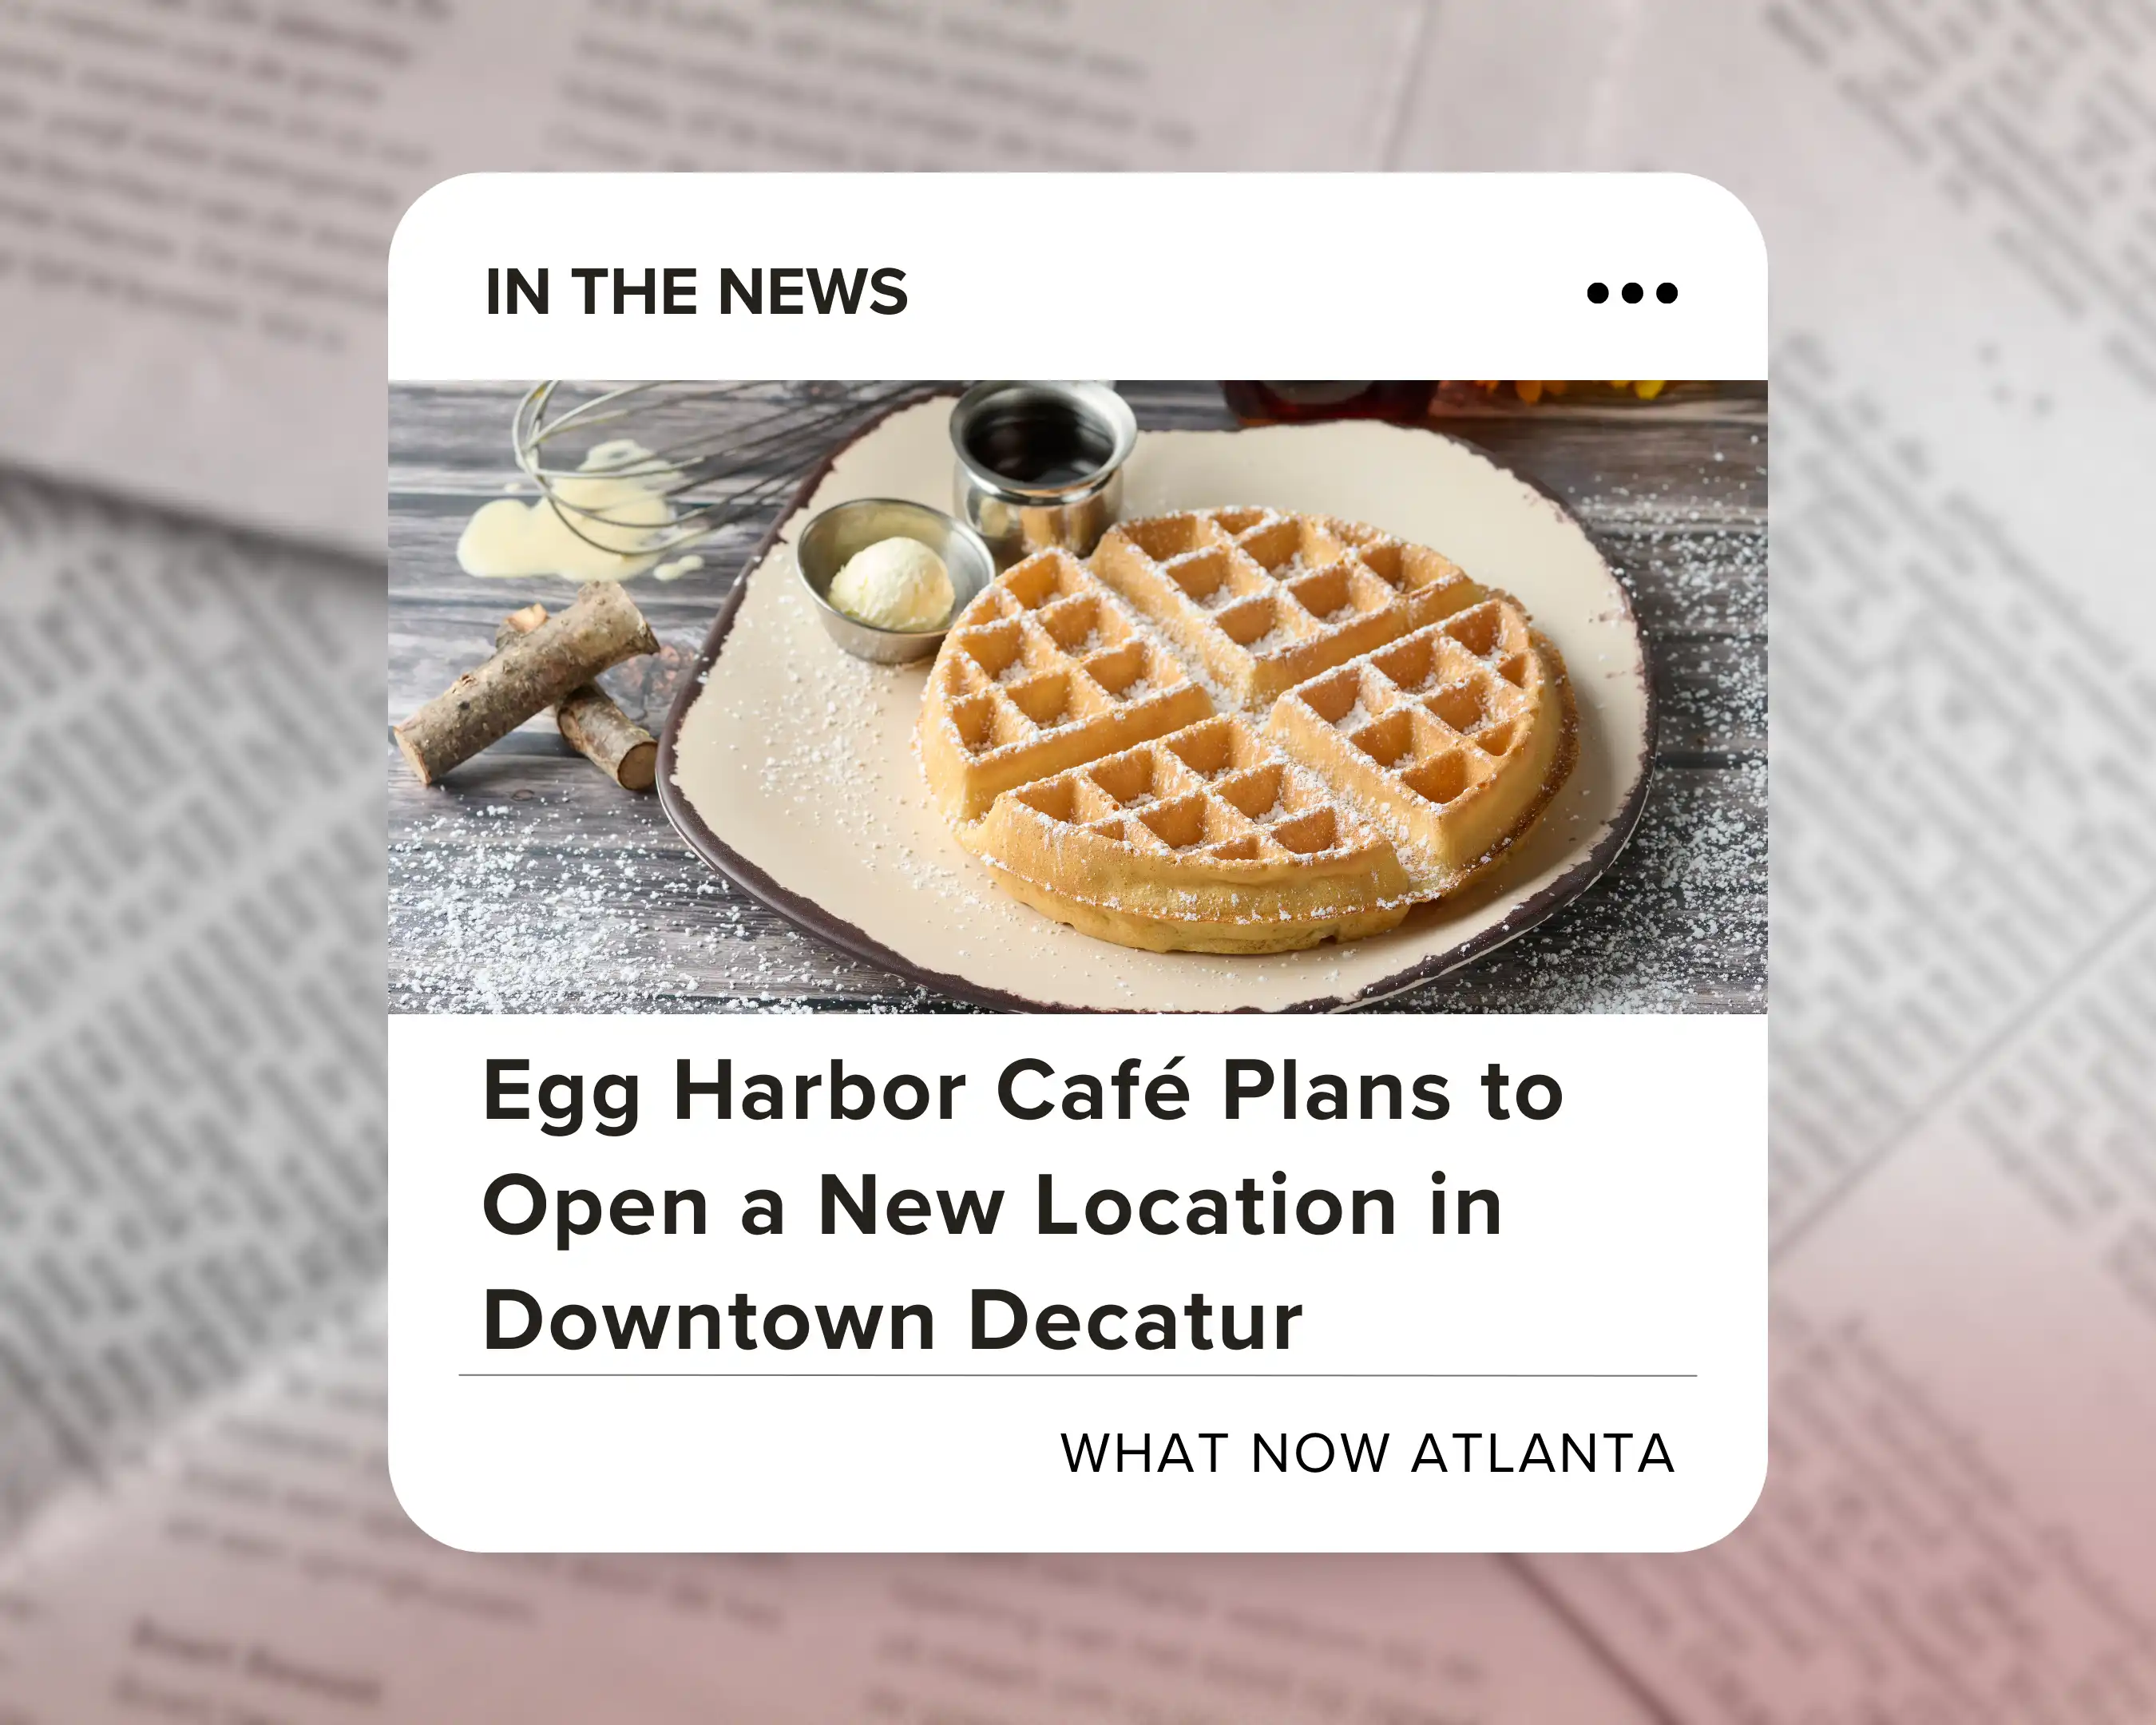 Egg Harbor Cafe to Open a New Location in Downtown Decatur - What Now Atlanta